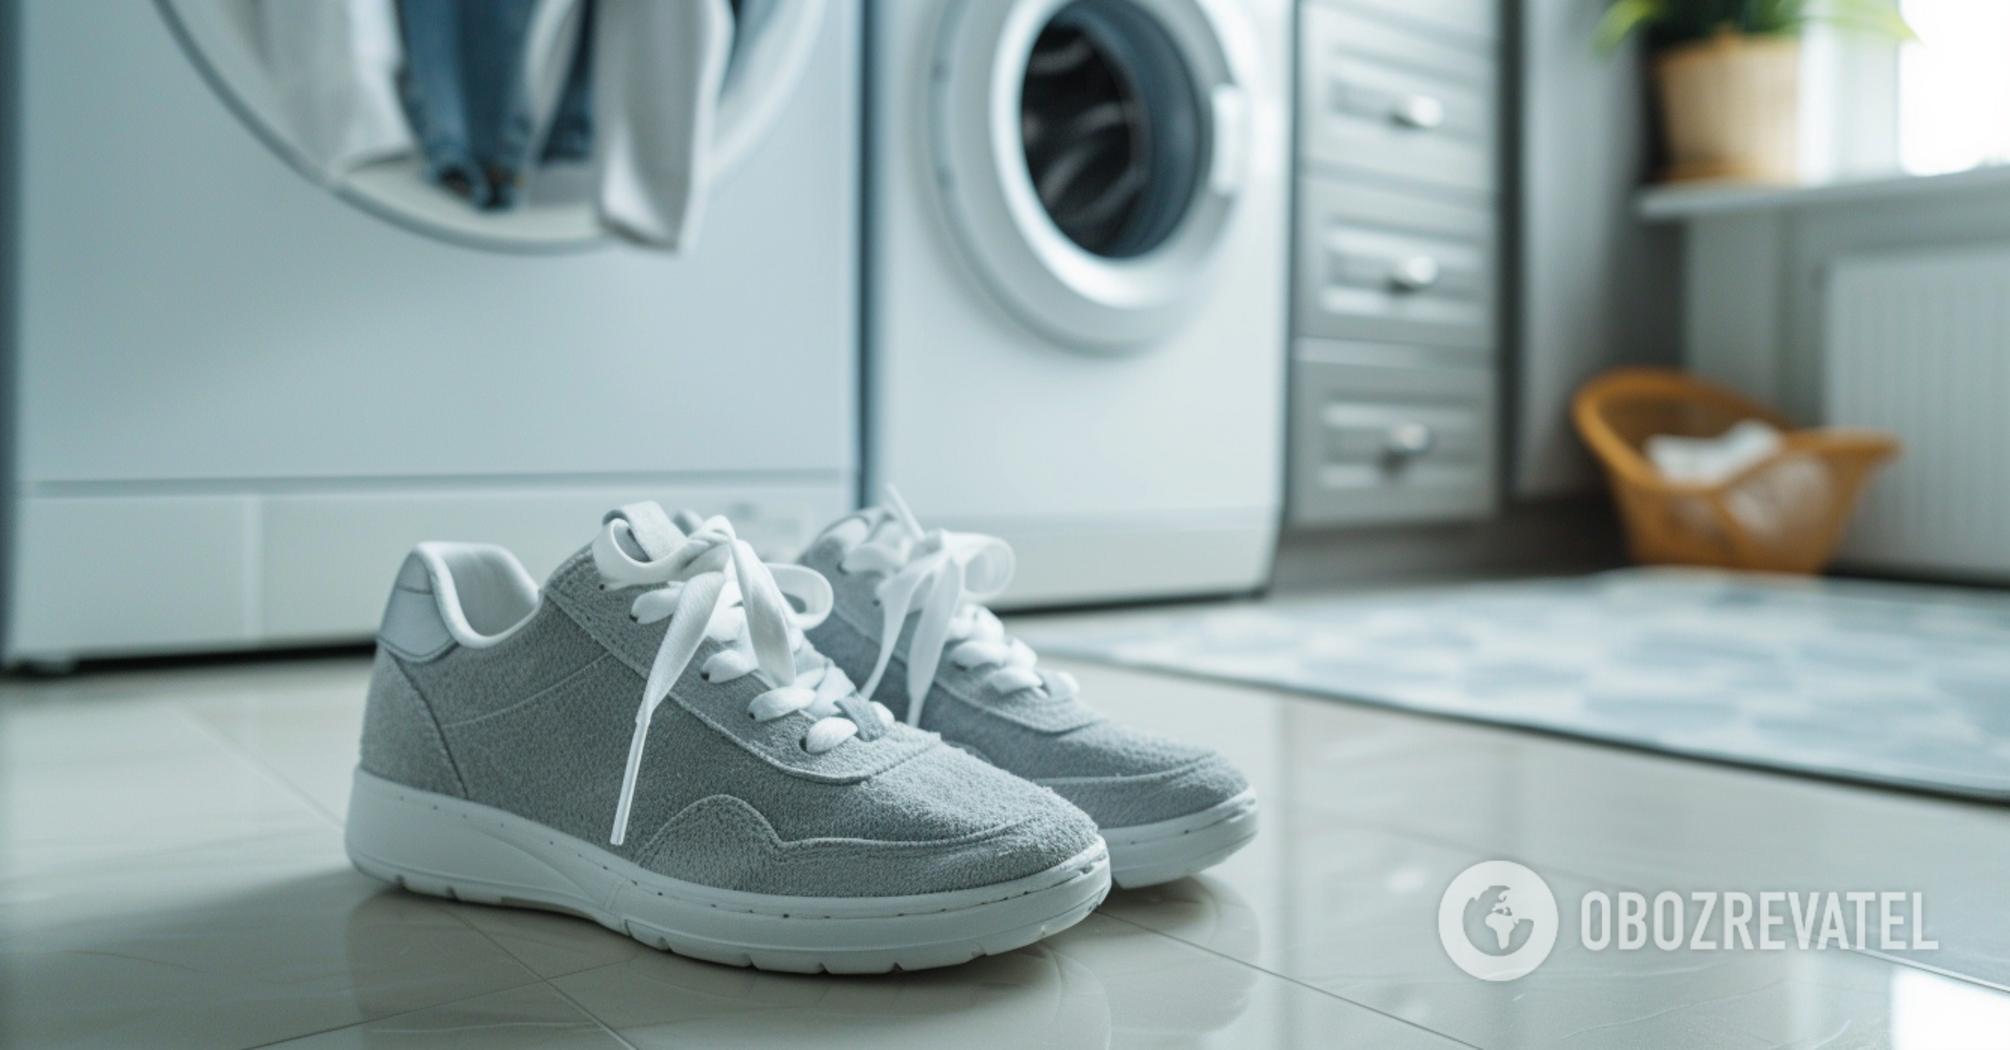 How to wash different types of shoes: detailed instructions